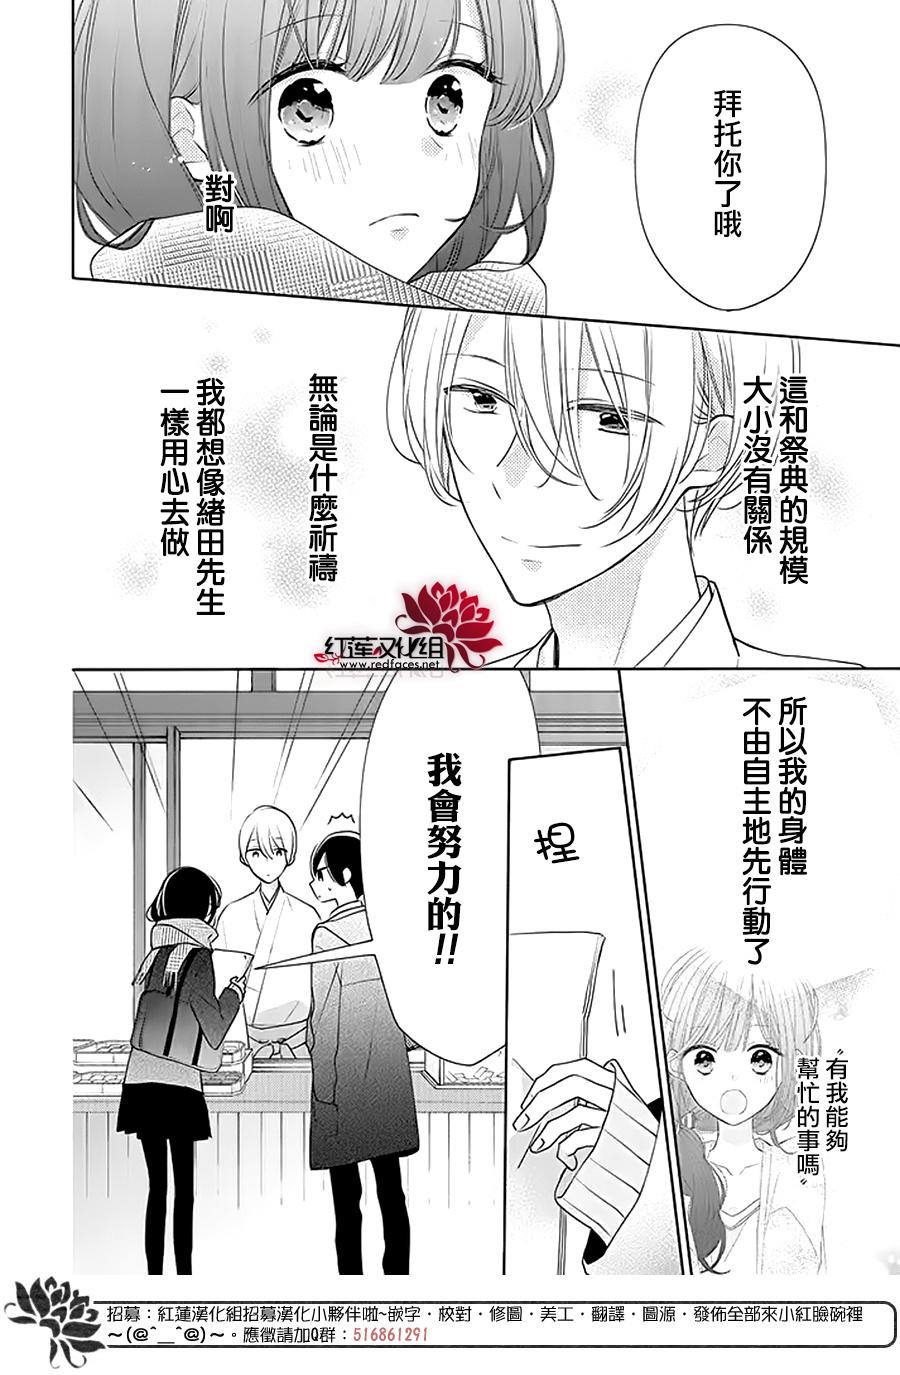 If given a second chance - 28話 - 2